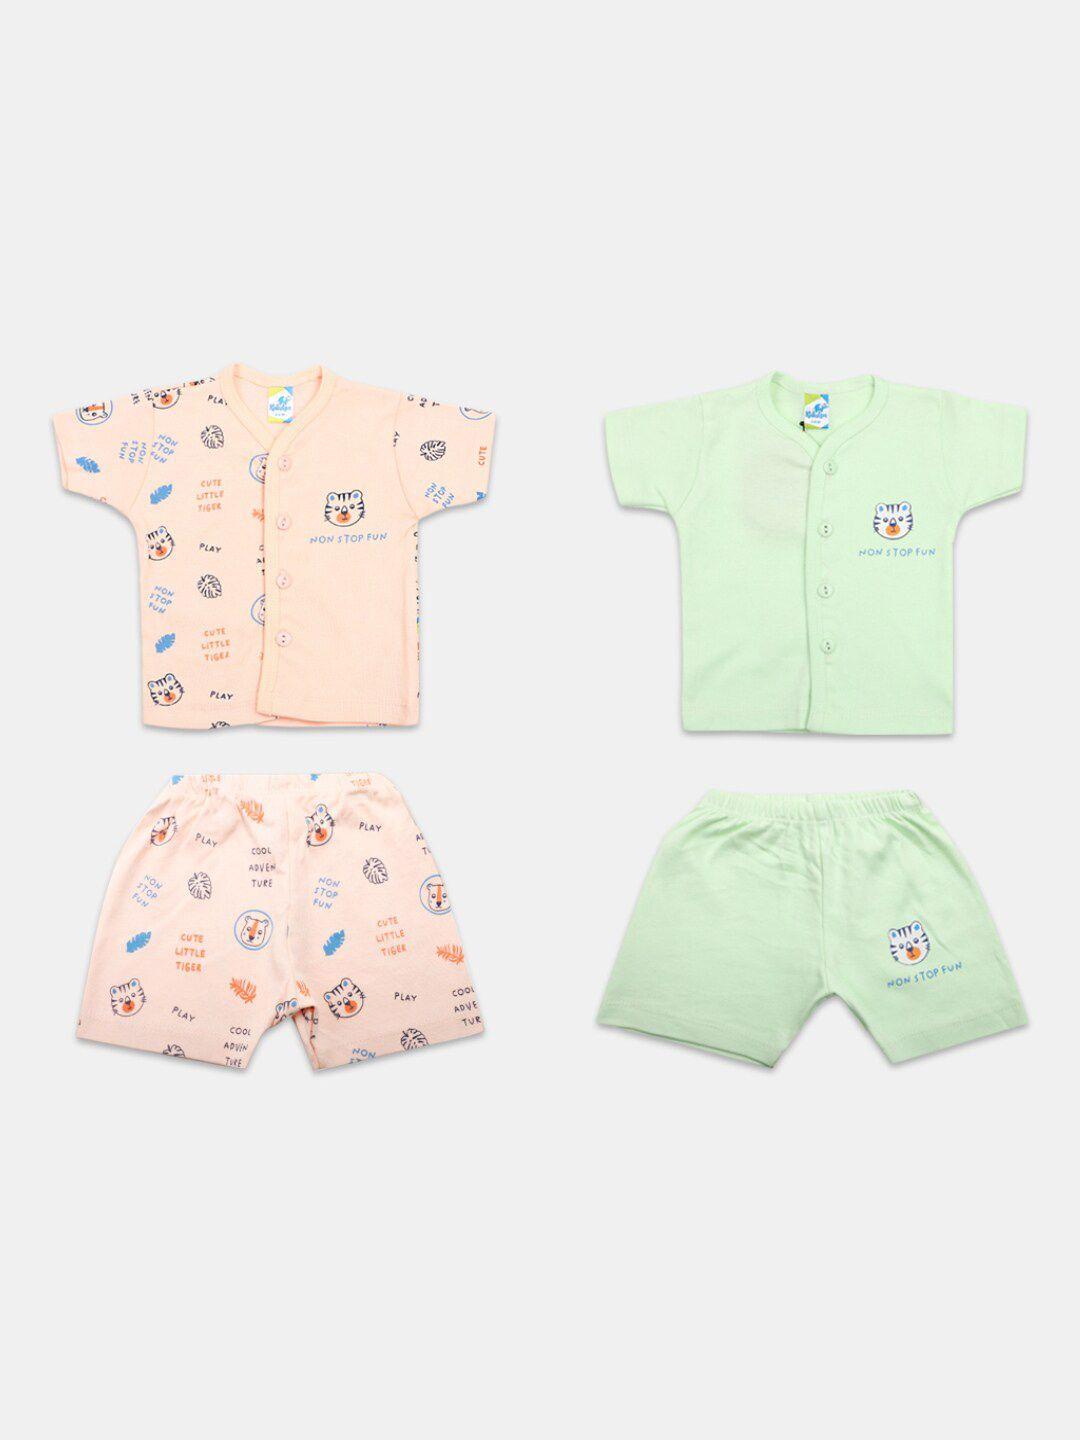 v-mart infants pack of 2 printed pure cotton shirt with shorts